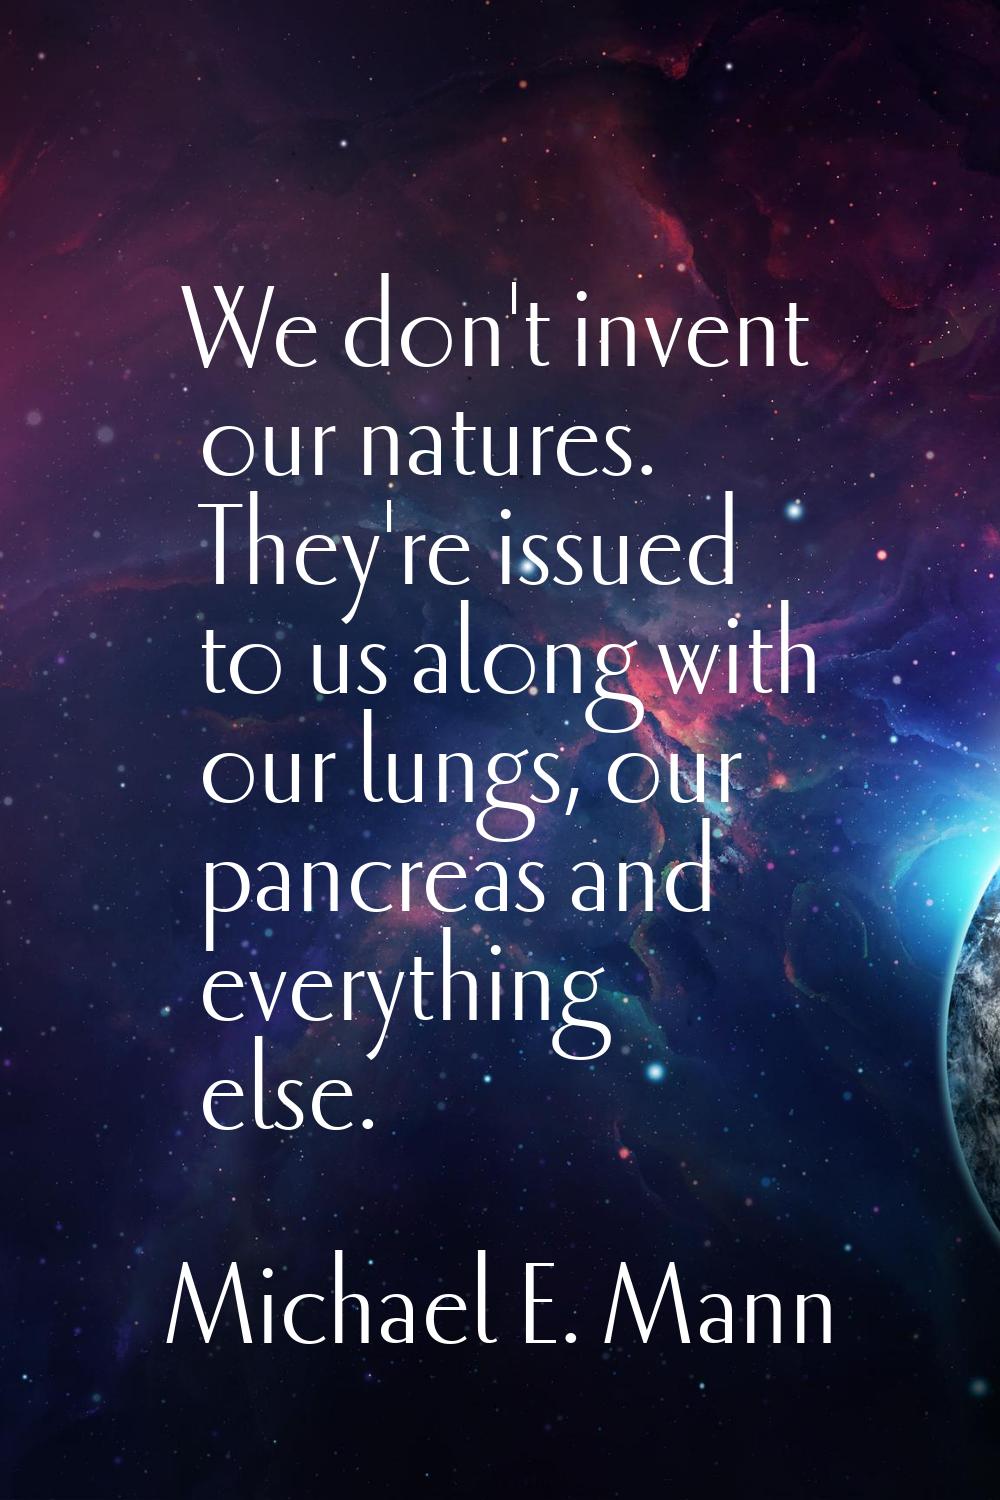 We don't invent our natures. They're issued to us along with our lungs, our pancreas and everything